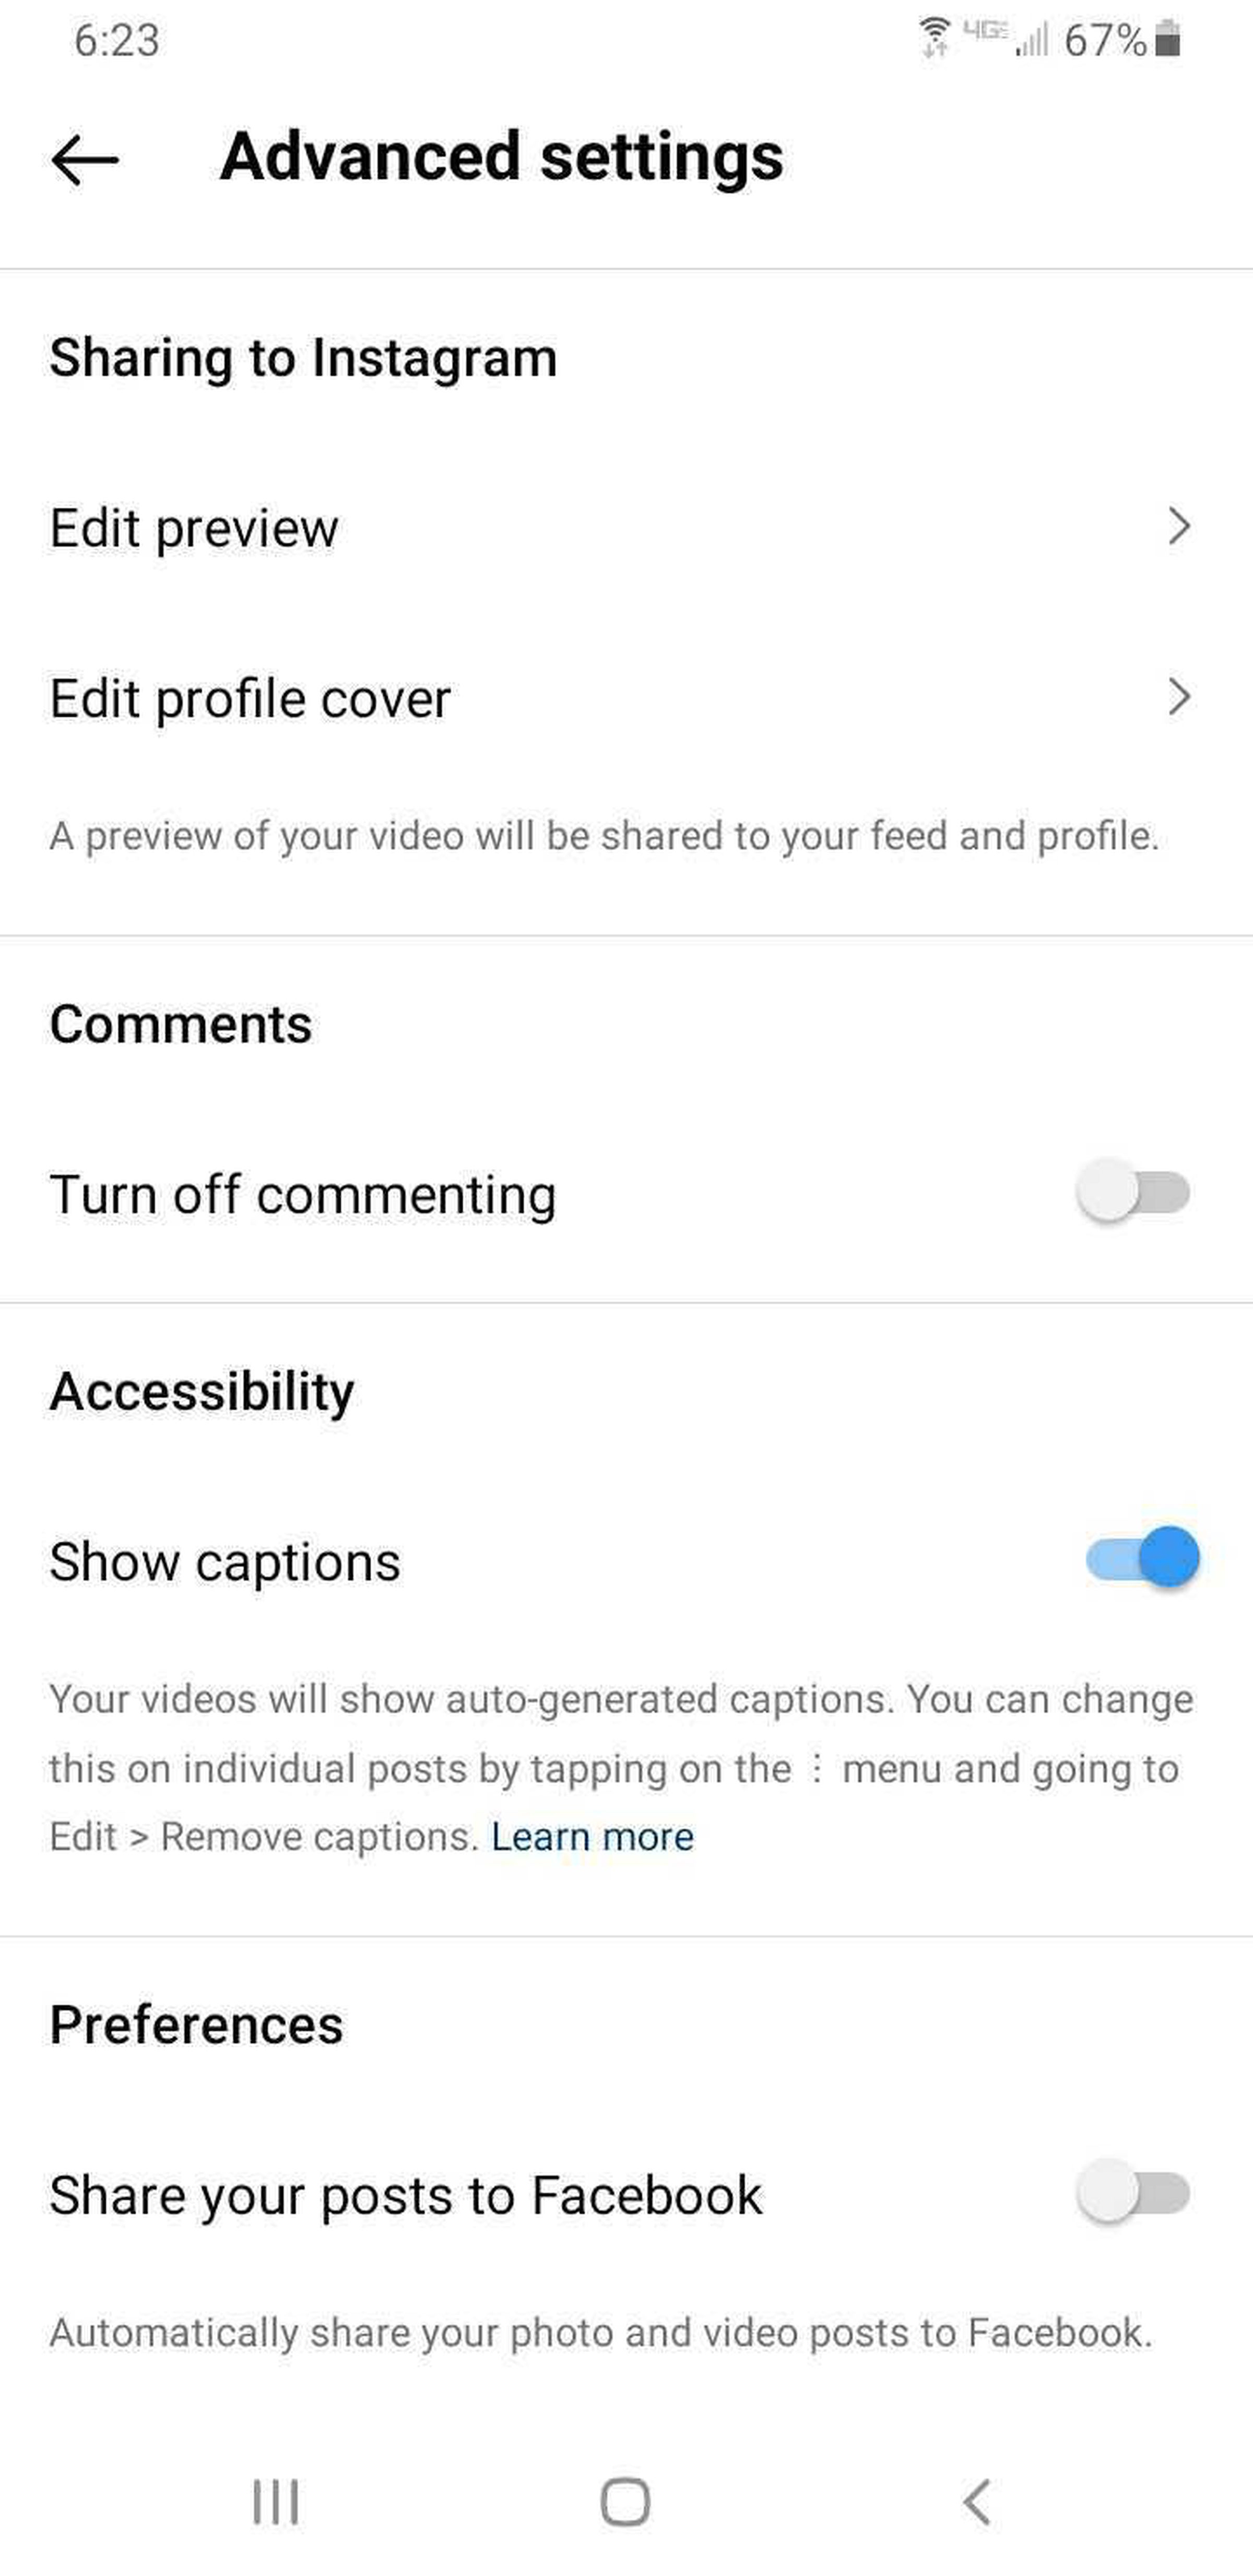 Toggle “Show captions” on or off.